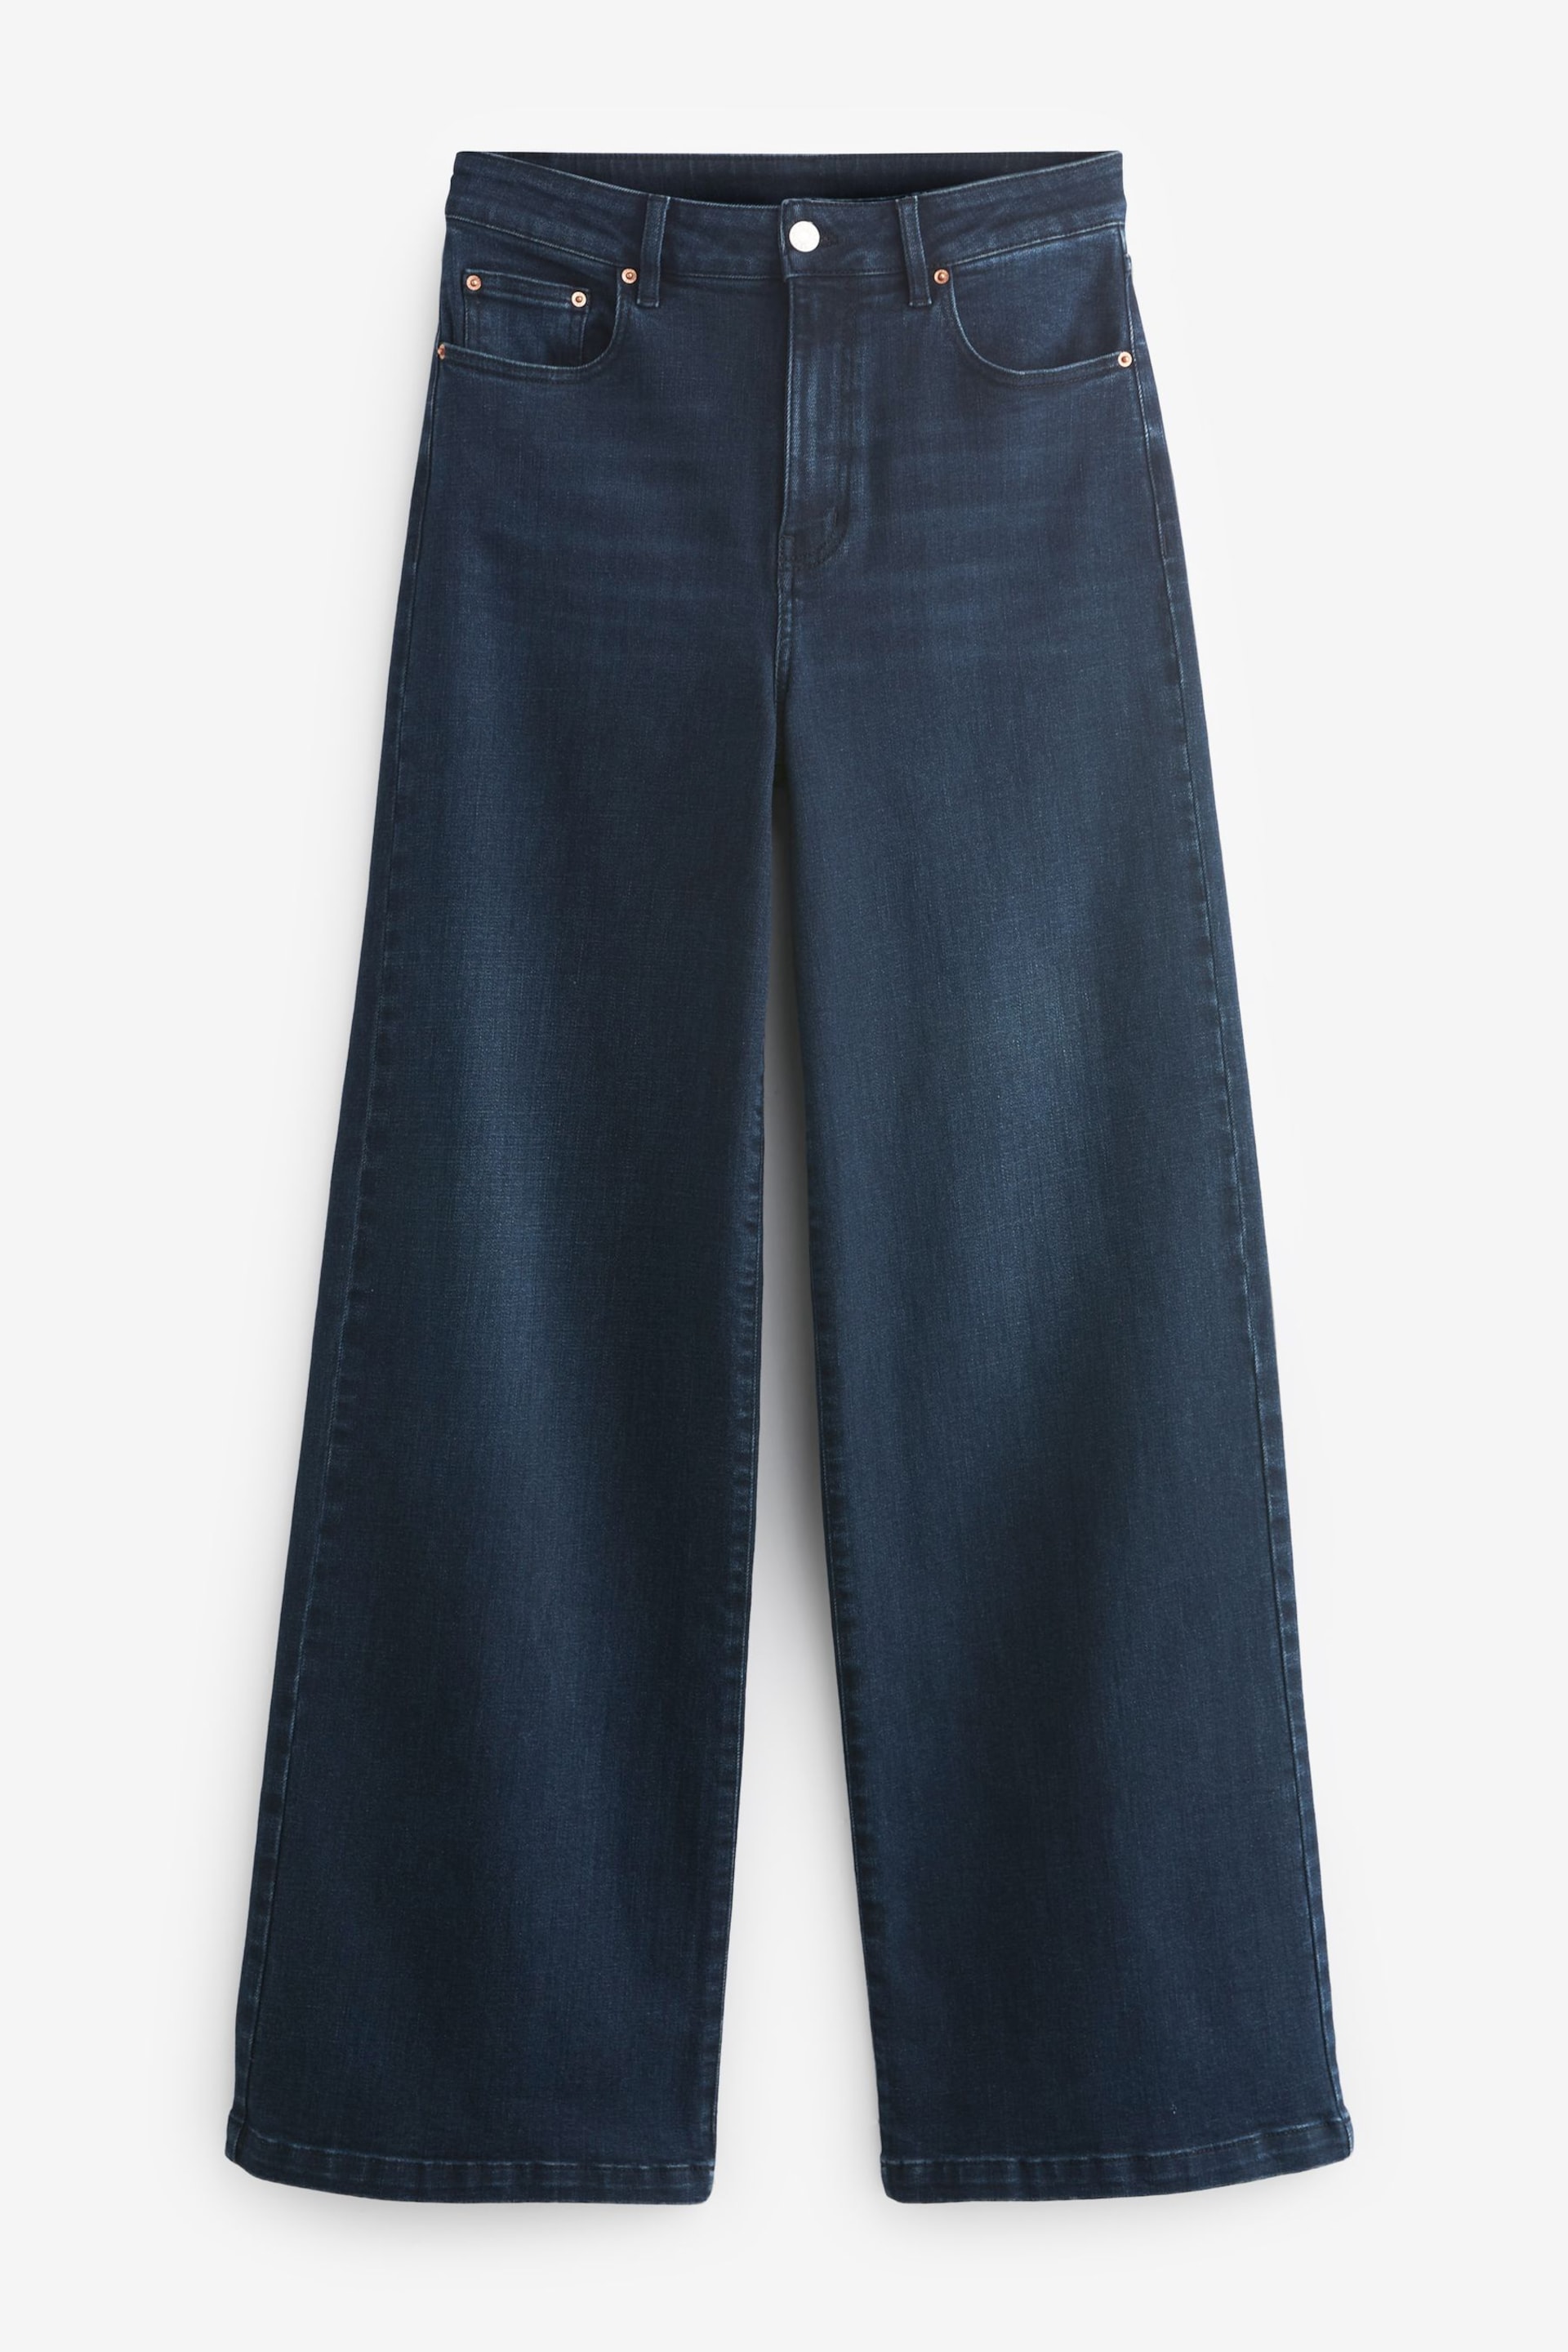 Inky Blue Hourglass Wide Leg Jeans - Image 6 of 7